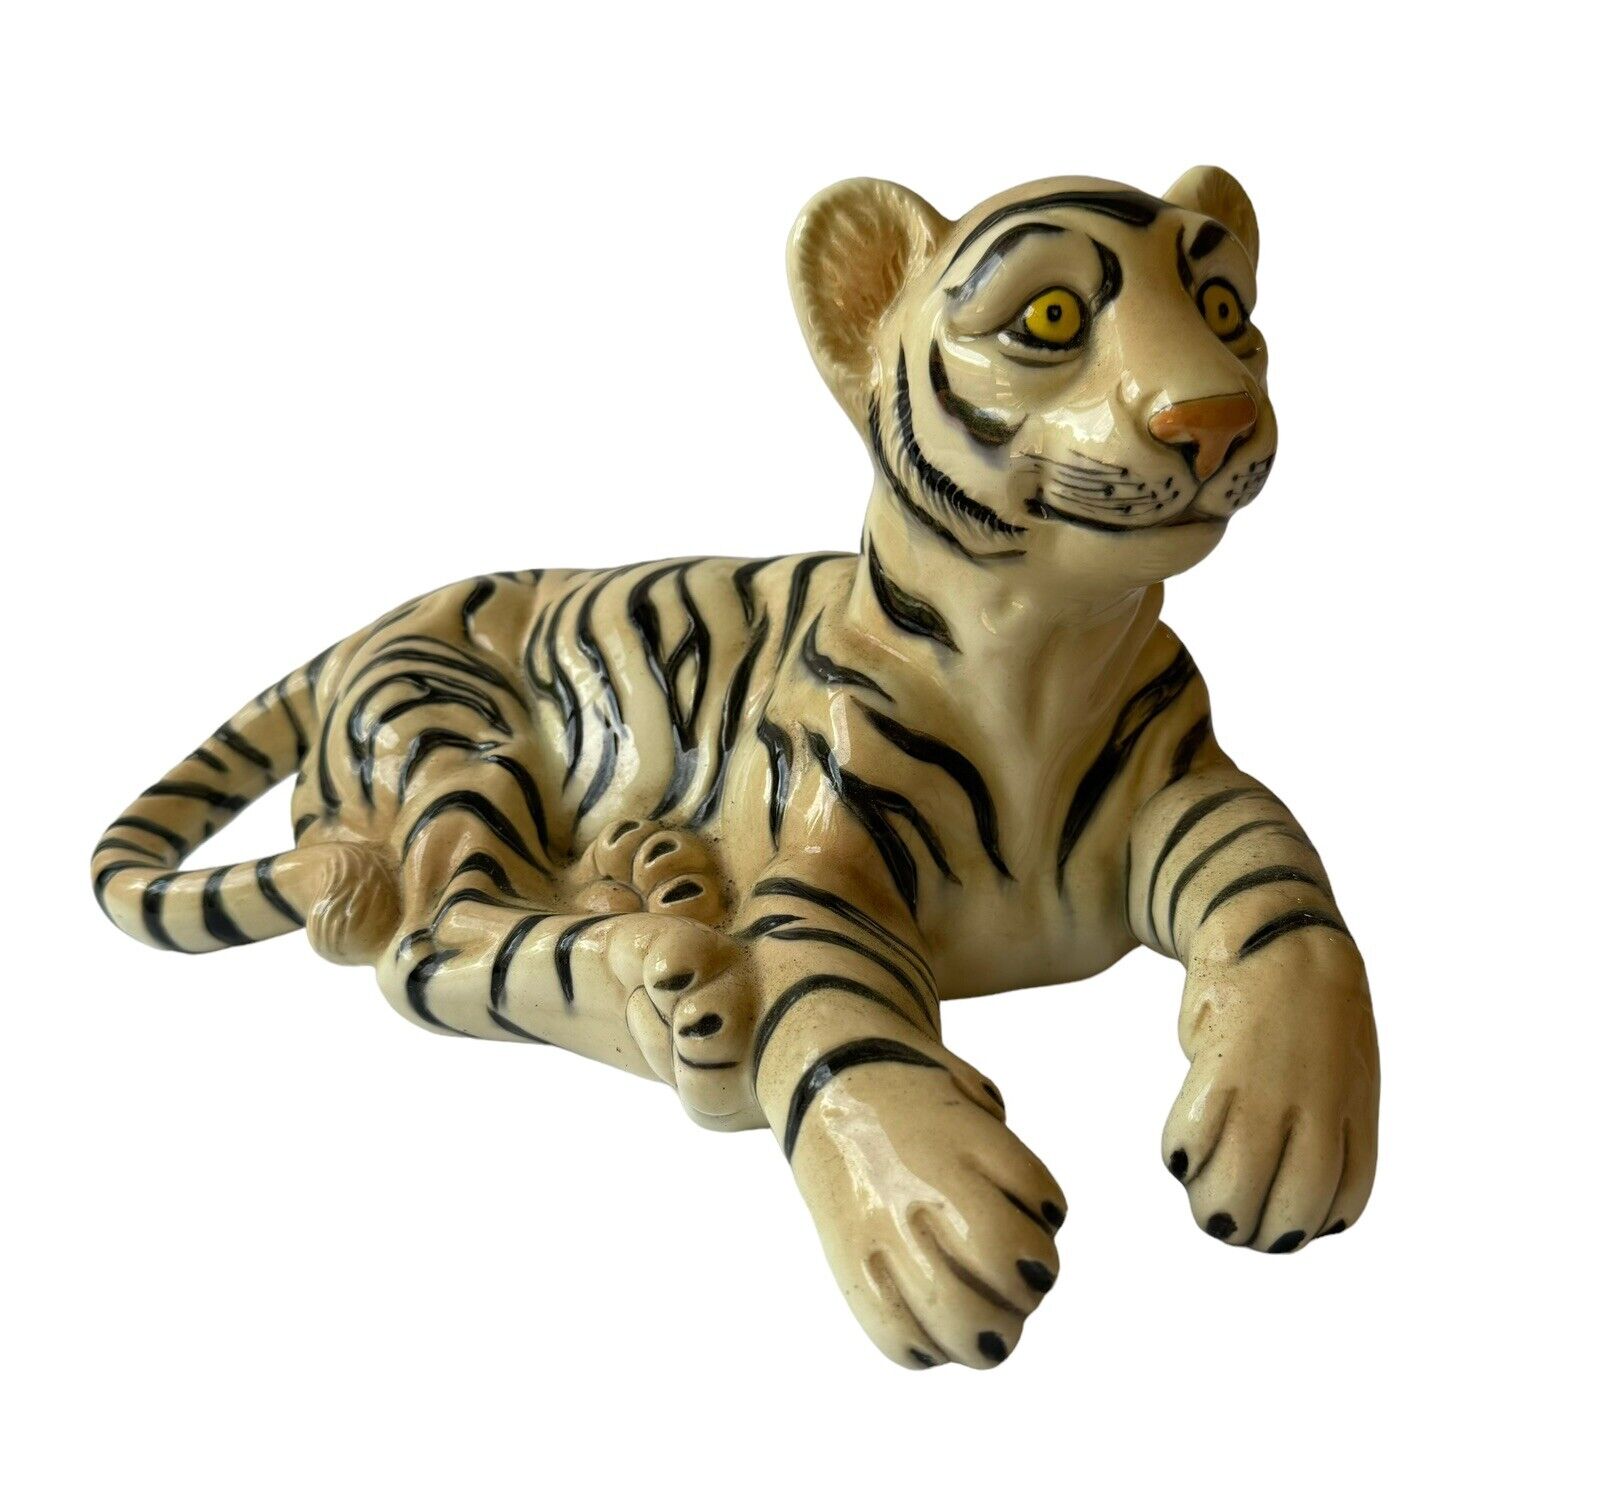 Handsome Vintage Ceramic Lounging Young Tiger Figurine - Made In Italy